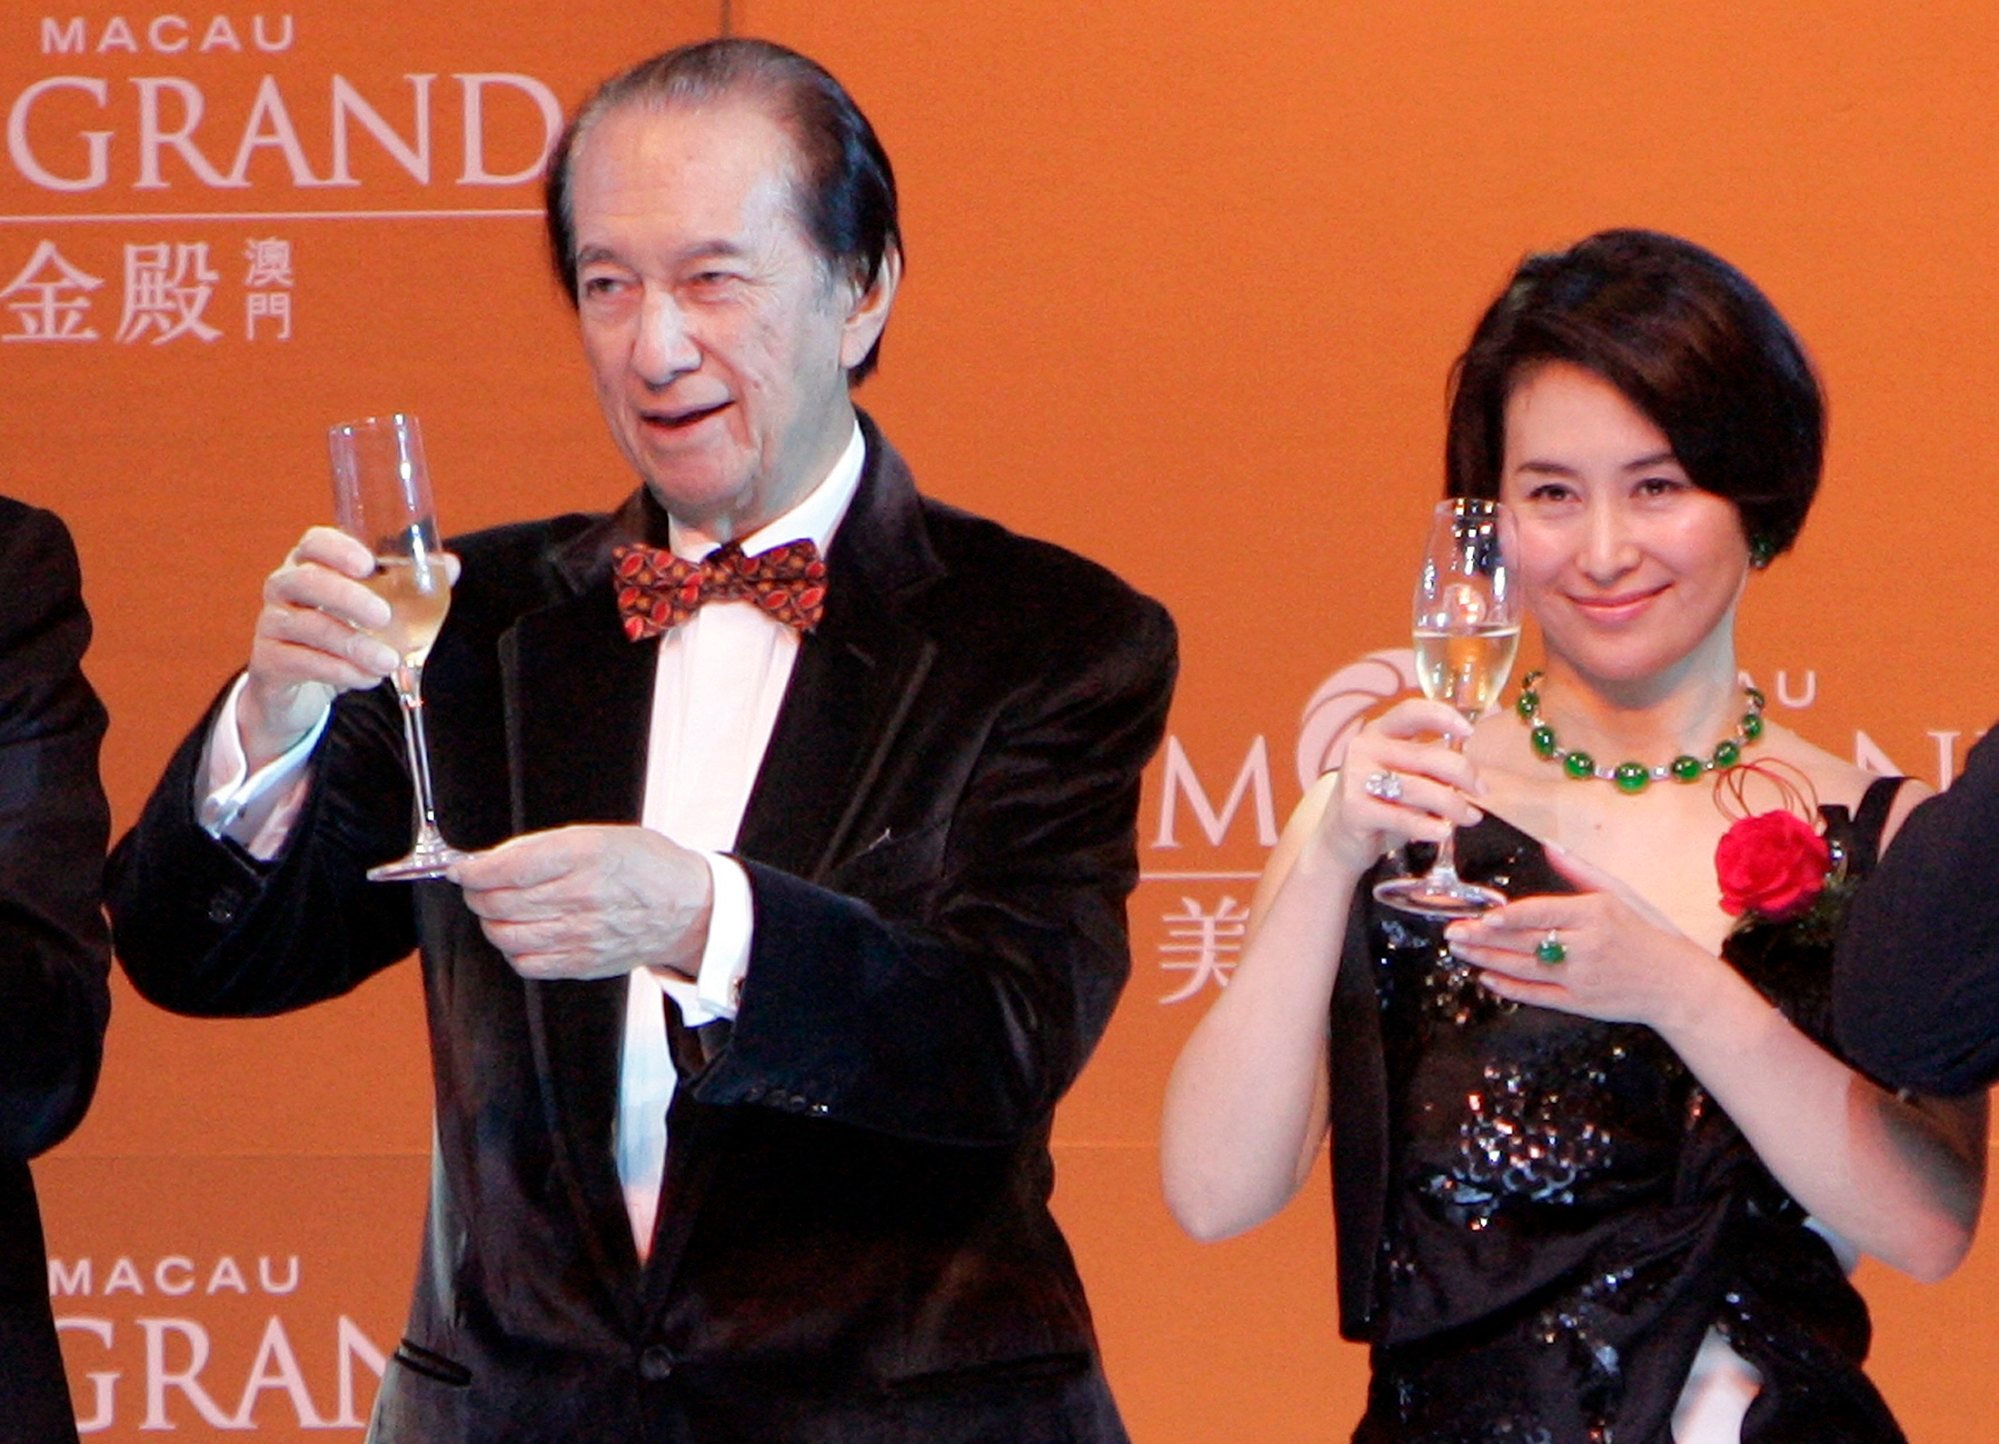 Hong Kong billionaire Pansy Ho at 60: from friendships with Canto-pop icons Anita Mui and Leslie Cheung, to taking over her casino tycoon father Stanley Ho's business empire | South China Morning